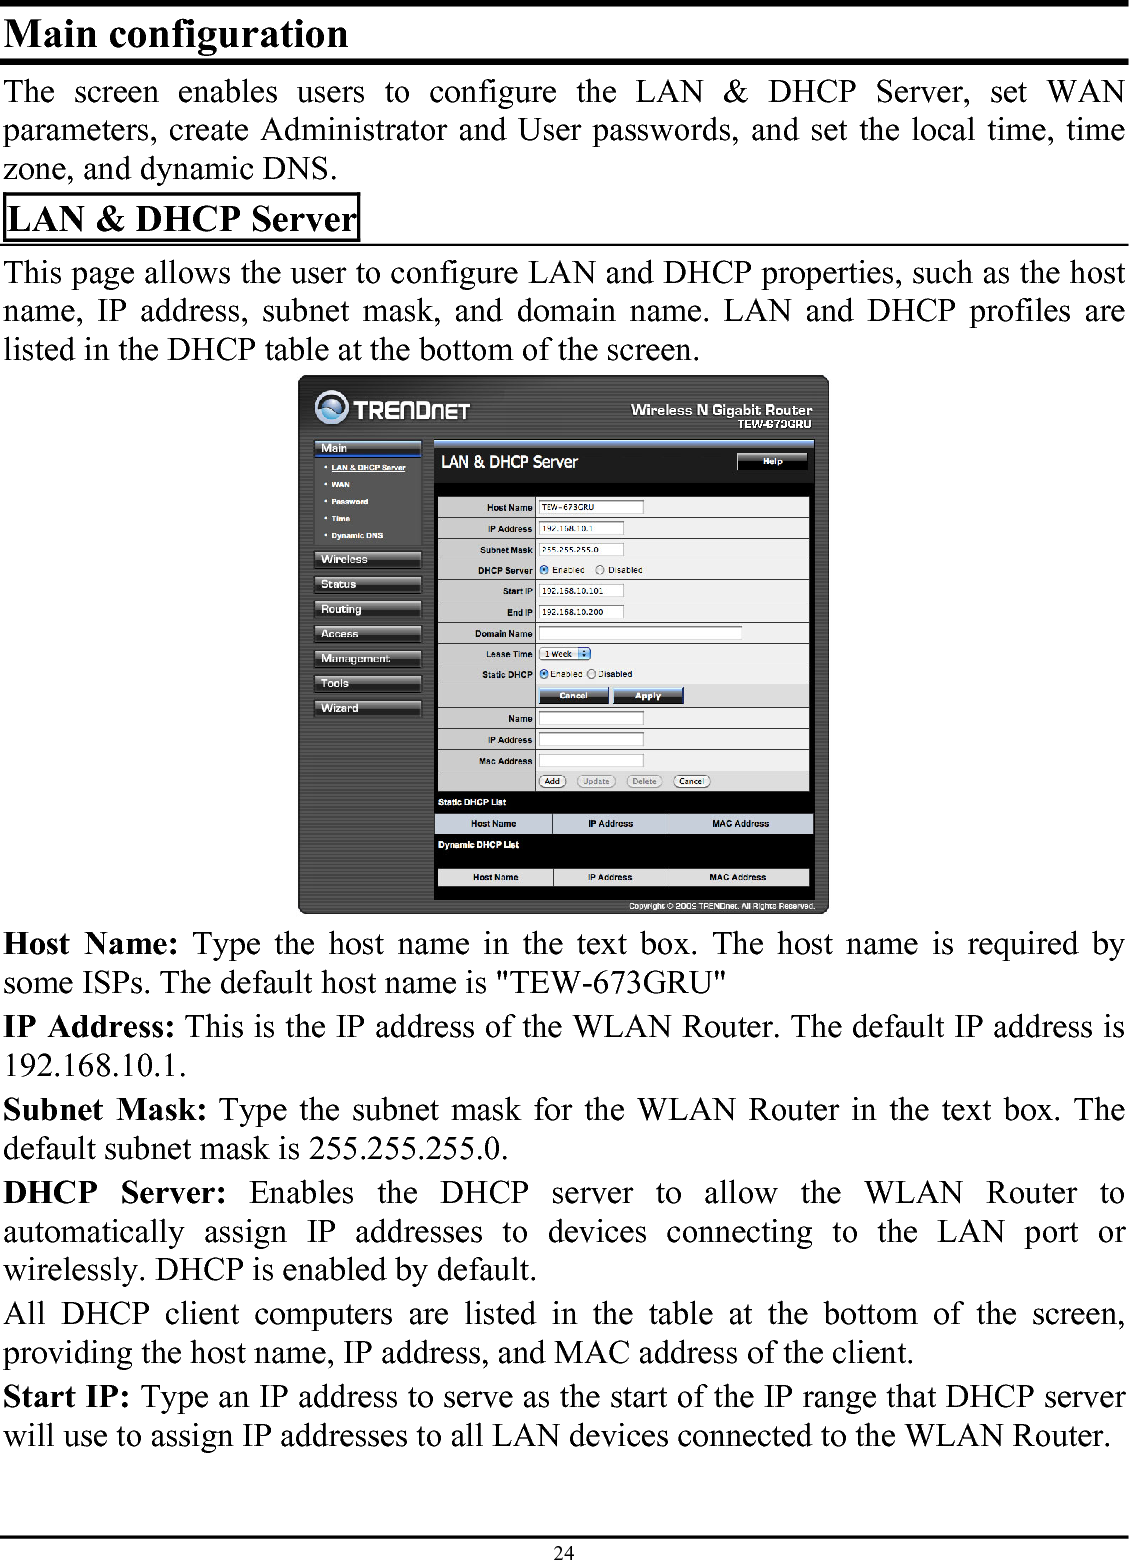 24 Main configuration The screen enables users to configure the LAN &amp; DHCP Server, set WAN parameters, create Administrator and User passwords, and set the local time, time zone, and dynamic DNS. LAN &amp; DHCP Server This page allows the user to configure LAN and DHCP properties, such as the host name, IP address, subnet mask, and domain name. LAN and DHCP profiles are listed in the DHCP table at the bottom of the screen.  Host Name: Type the host name in the text box. The host name is required by some ISPs. The default host name is &quot;TEW-673GRU&quot; IP Address: This is the IP address of the WLAN Router. The default IP address is 192.168.10.1. Subnet Mask: Type the subnet mask for the WLAN Router in the text box. The default subnet mask is 255.255.255.0. DHCP Server: Enables the DHCP server to allow the WLAN Router to automatically assign IP addresses to devices connecting to the LAN port or wirelessly. DHCP is enabled by default. All DHCP client computers are listed in the table at the bottom of the screen, providing the host name, IP address, and MAC address of the client. Start IP: Type an IP address to serve as the start of the IP range that DHCP server will use to assign IP addresses to all LAN devices connected to the WLAN Router. 